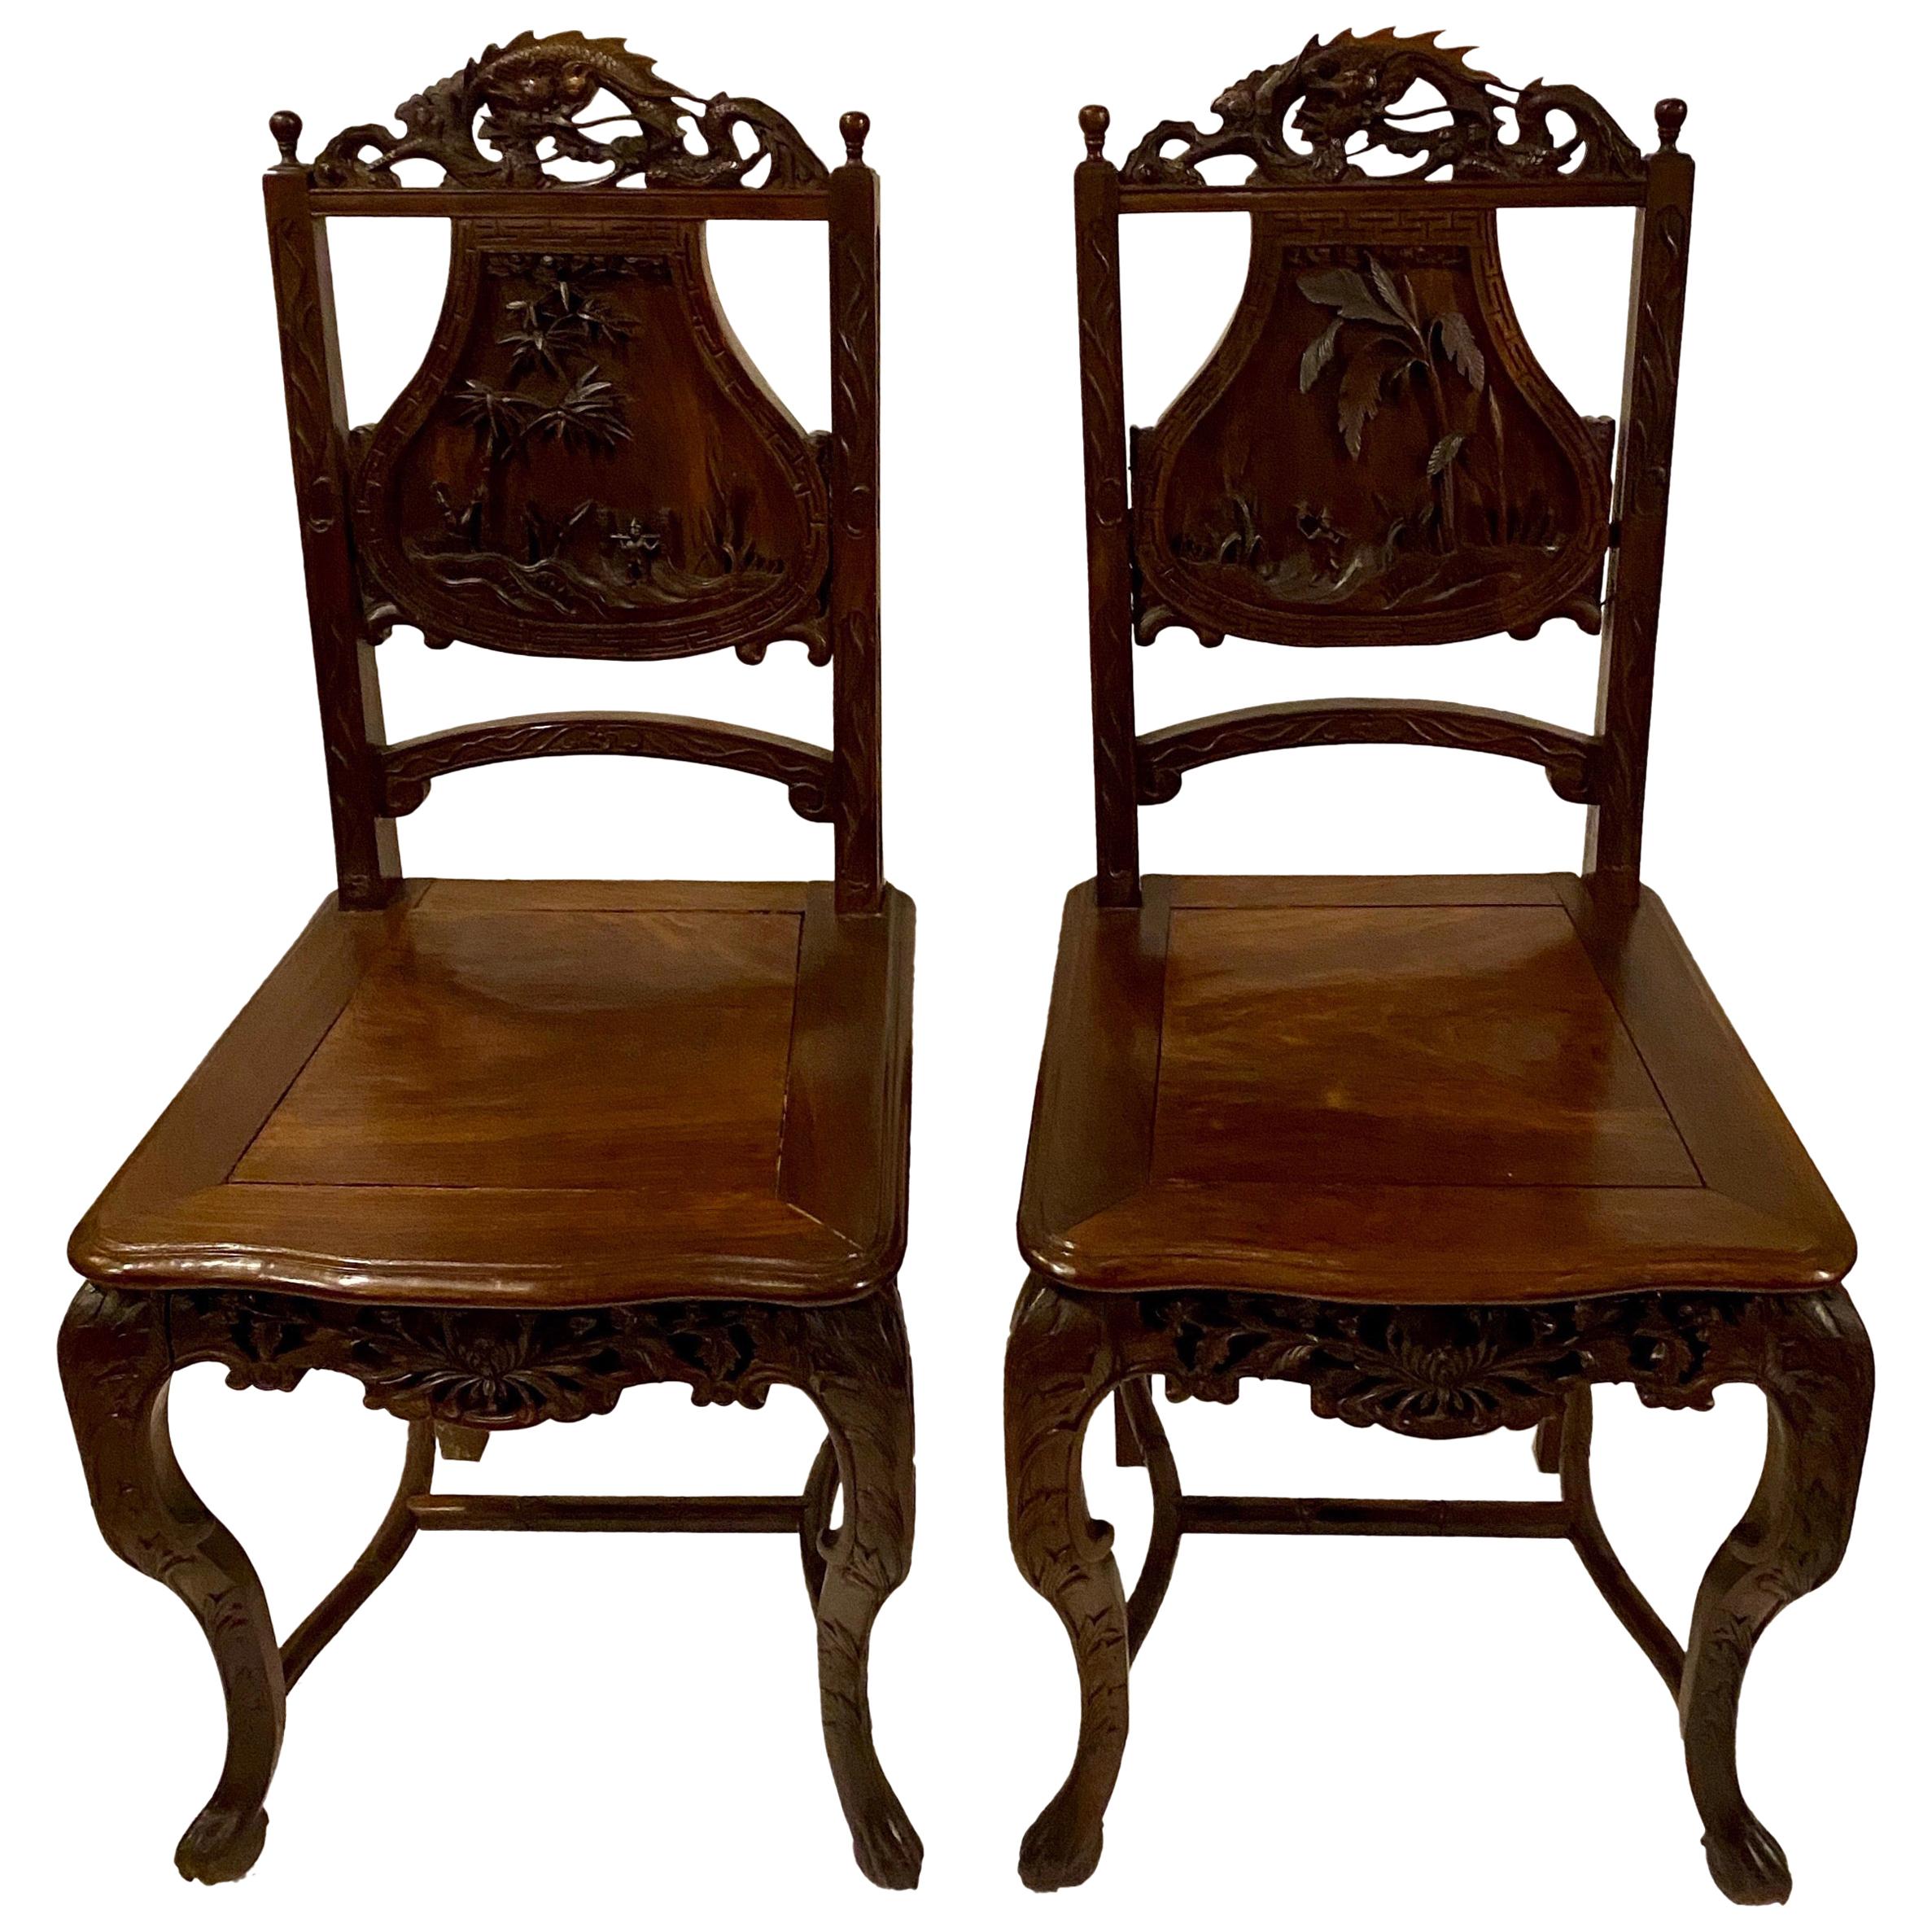 Pair of Antique Chinoiserie Carved Teak 19th Century Chairs